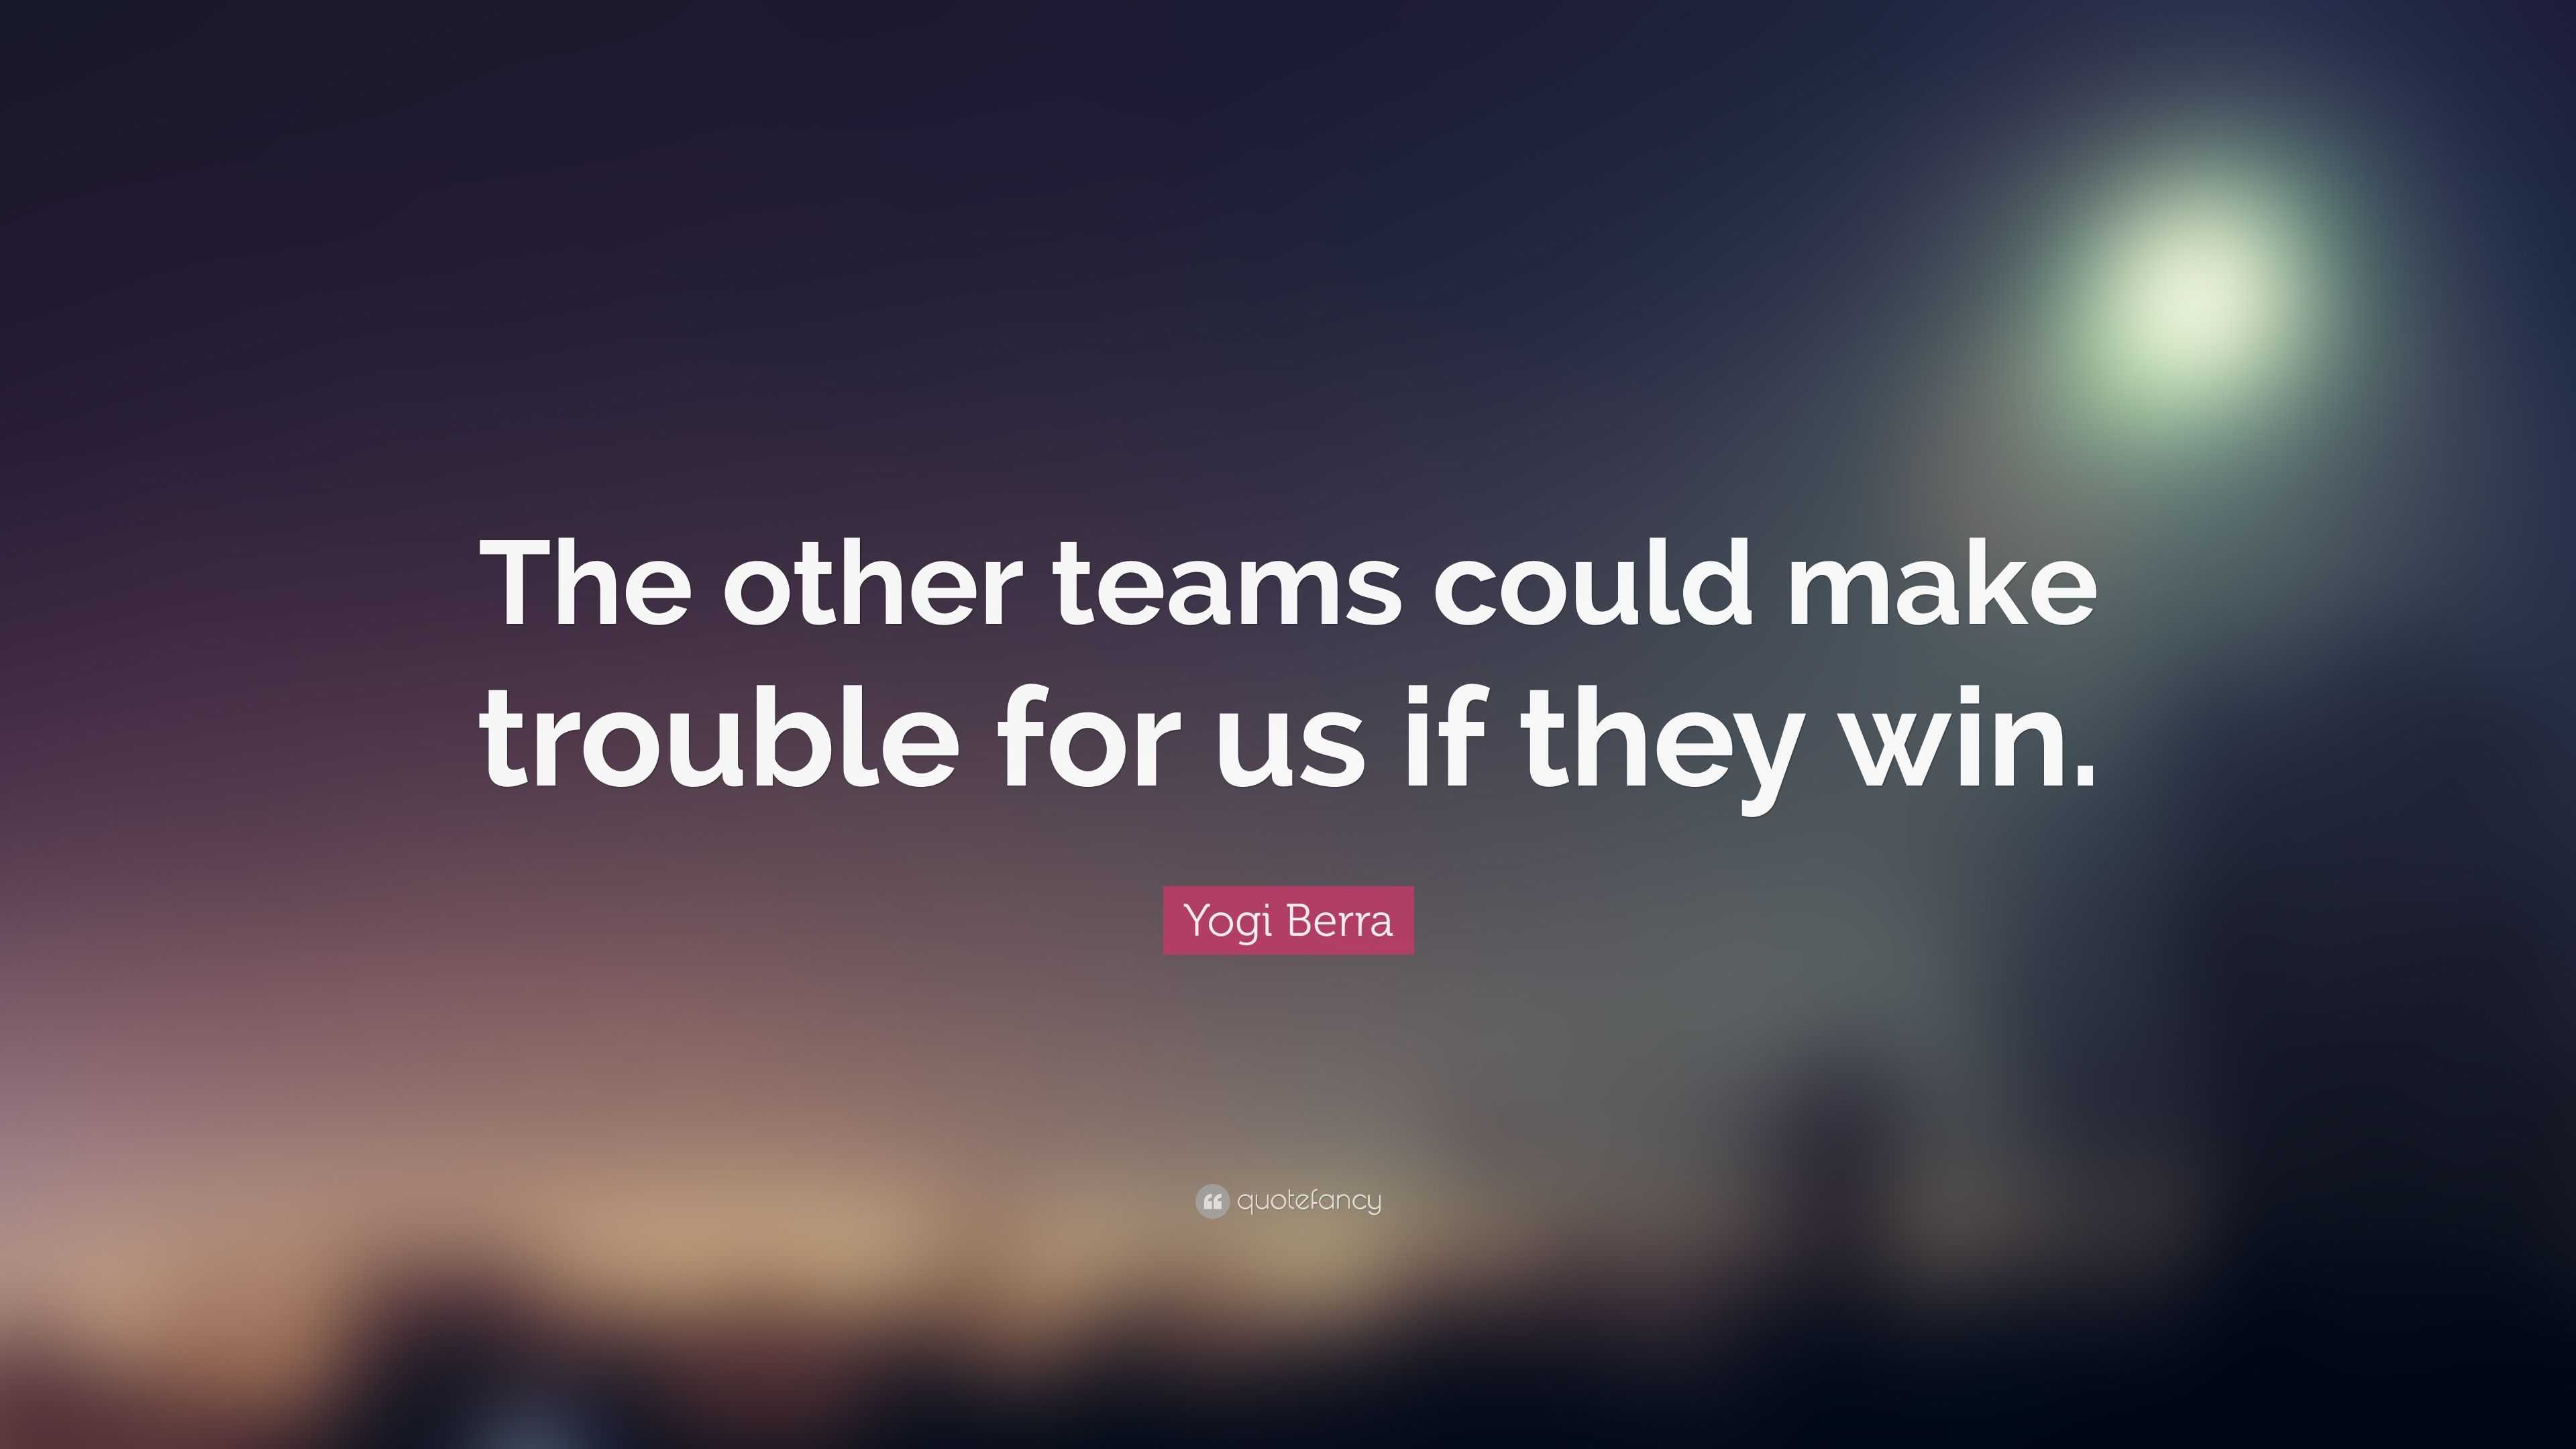 Yogi Berra Quote: “The other teams could make trouble for us if they win.”